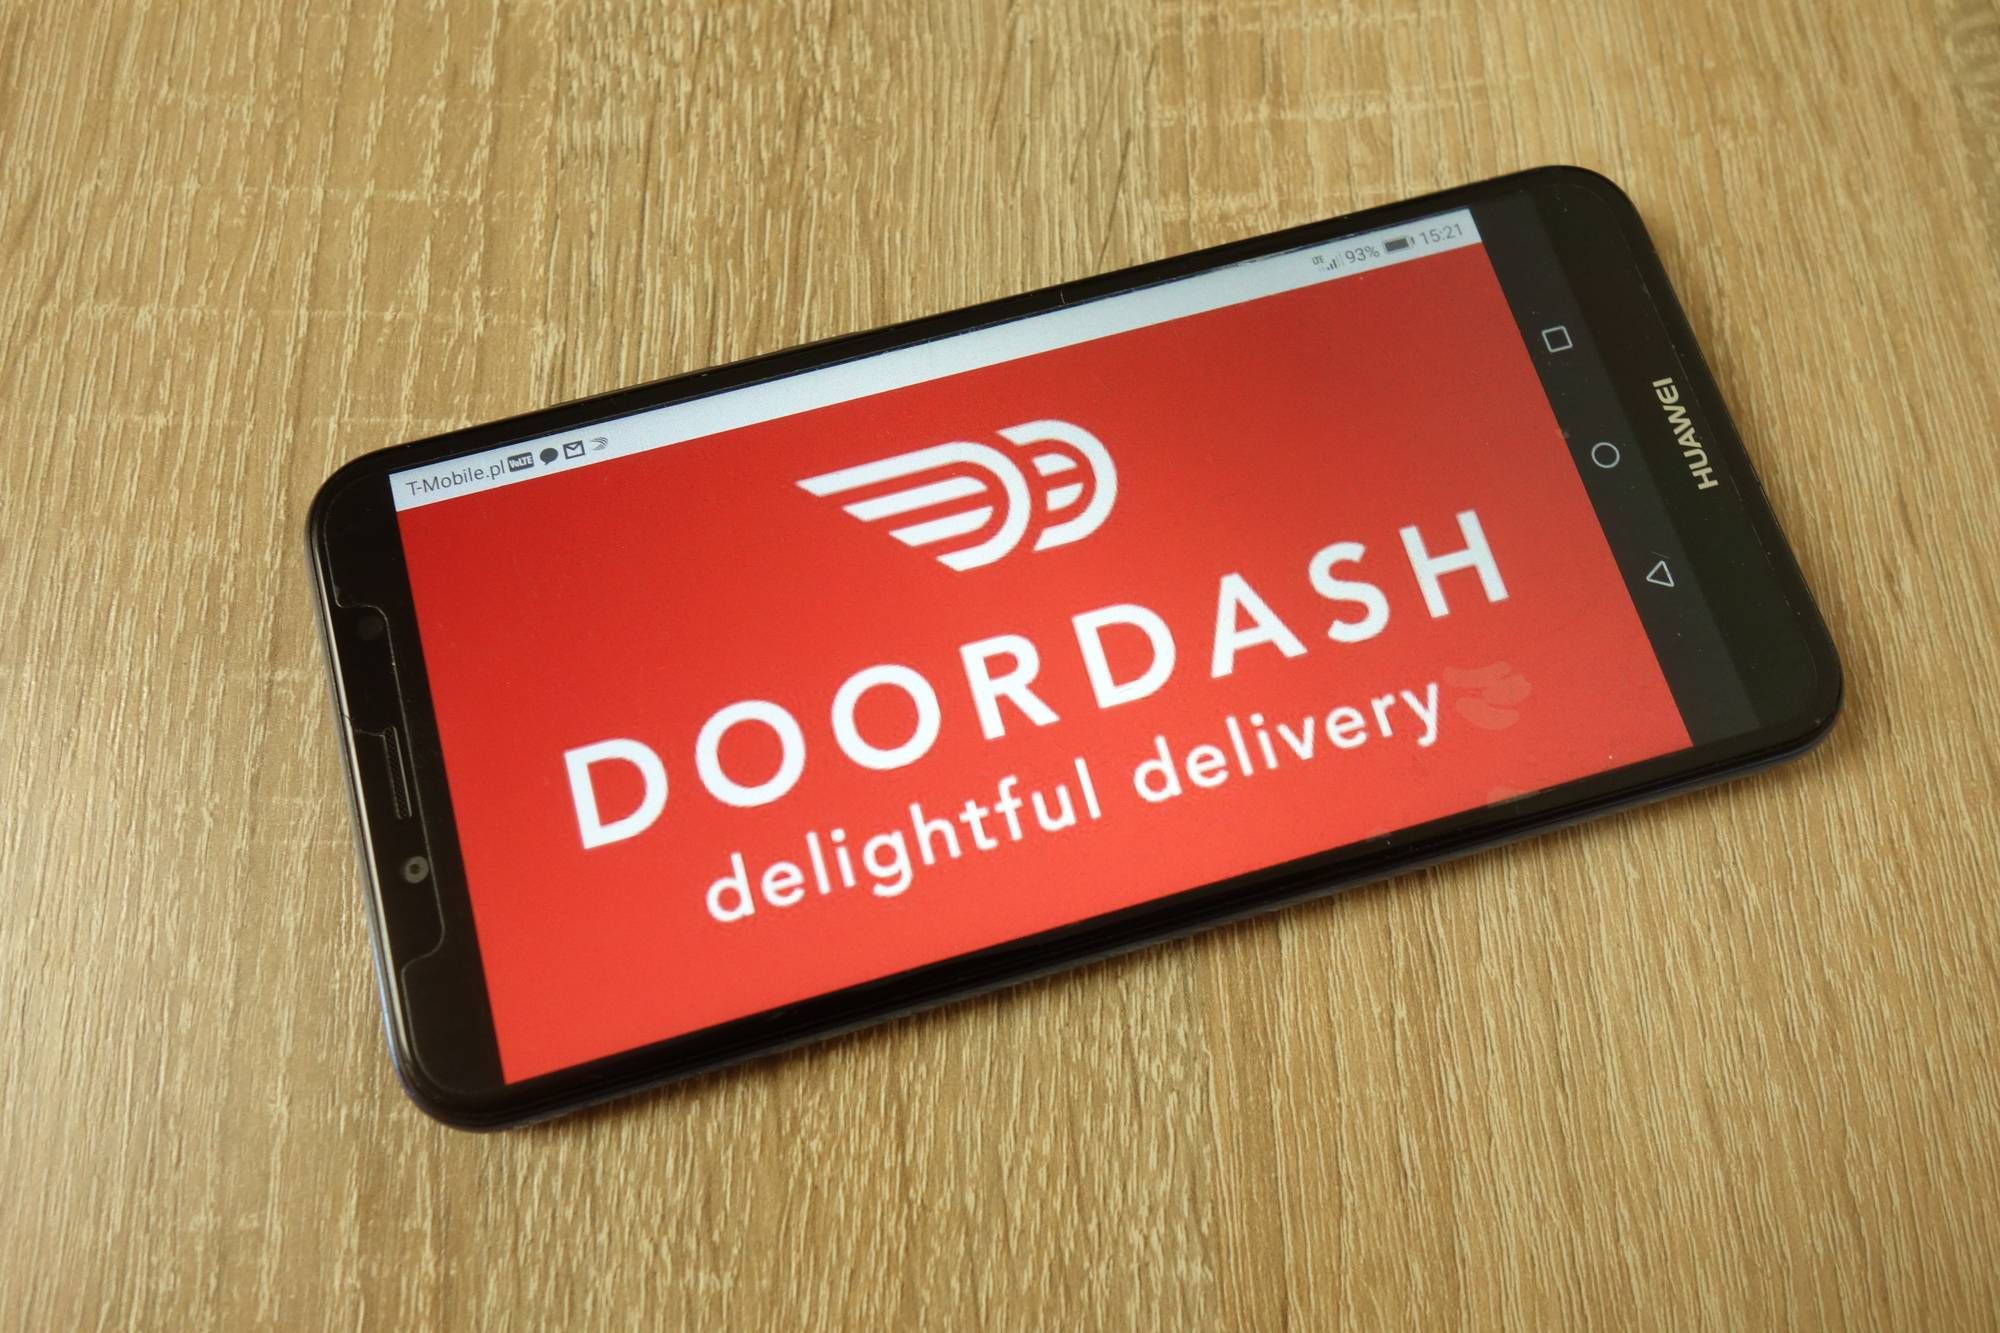 DoorDash Driver Scam Alert: DO NOT GIVE YOUR PASSWORD - Advice, Experiences  - Uber Drivers Forum For Customer Service, Tips, Experience